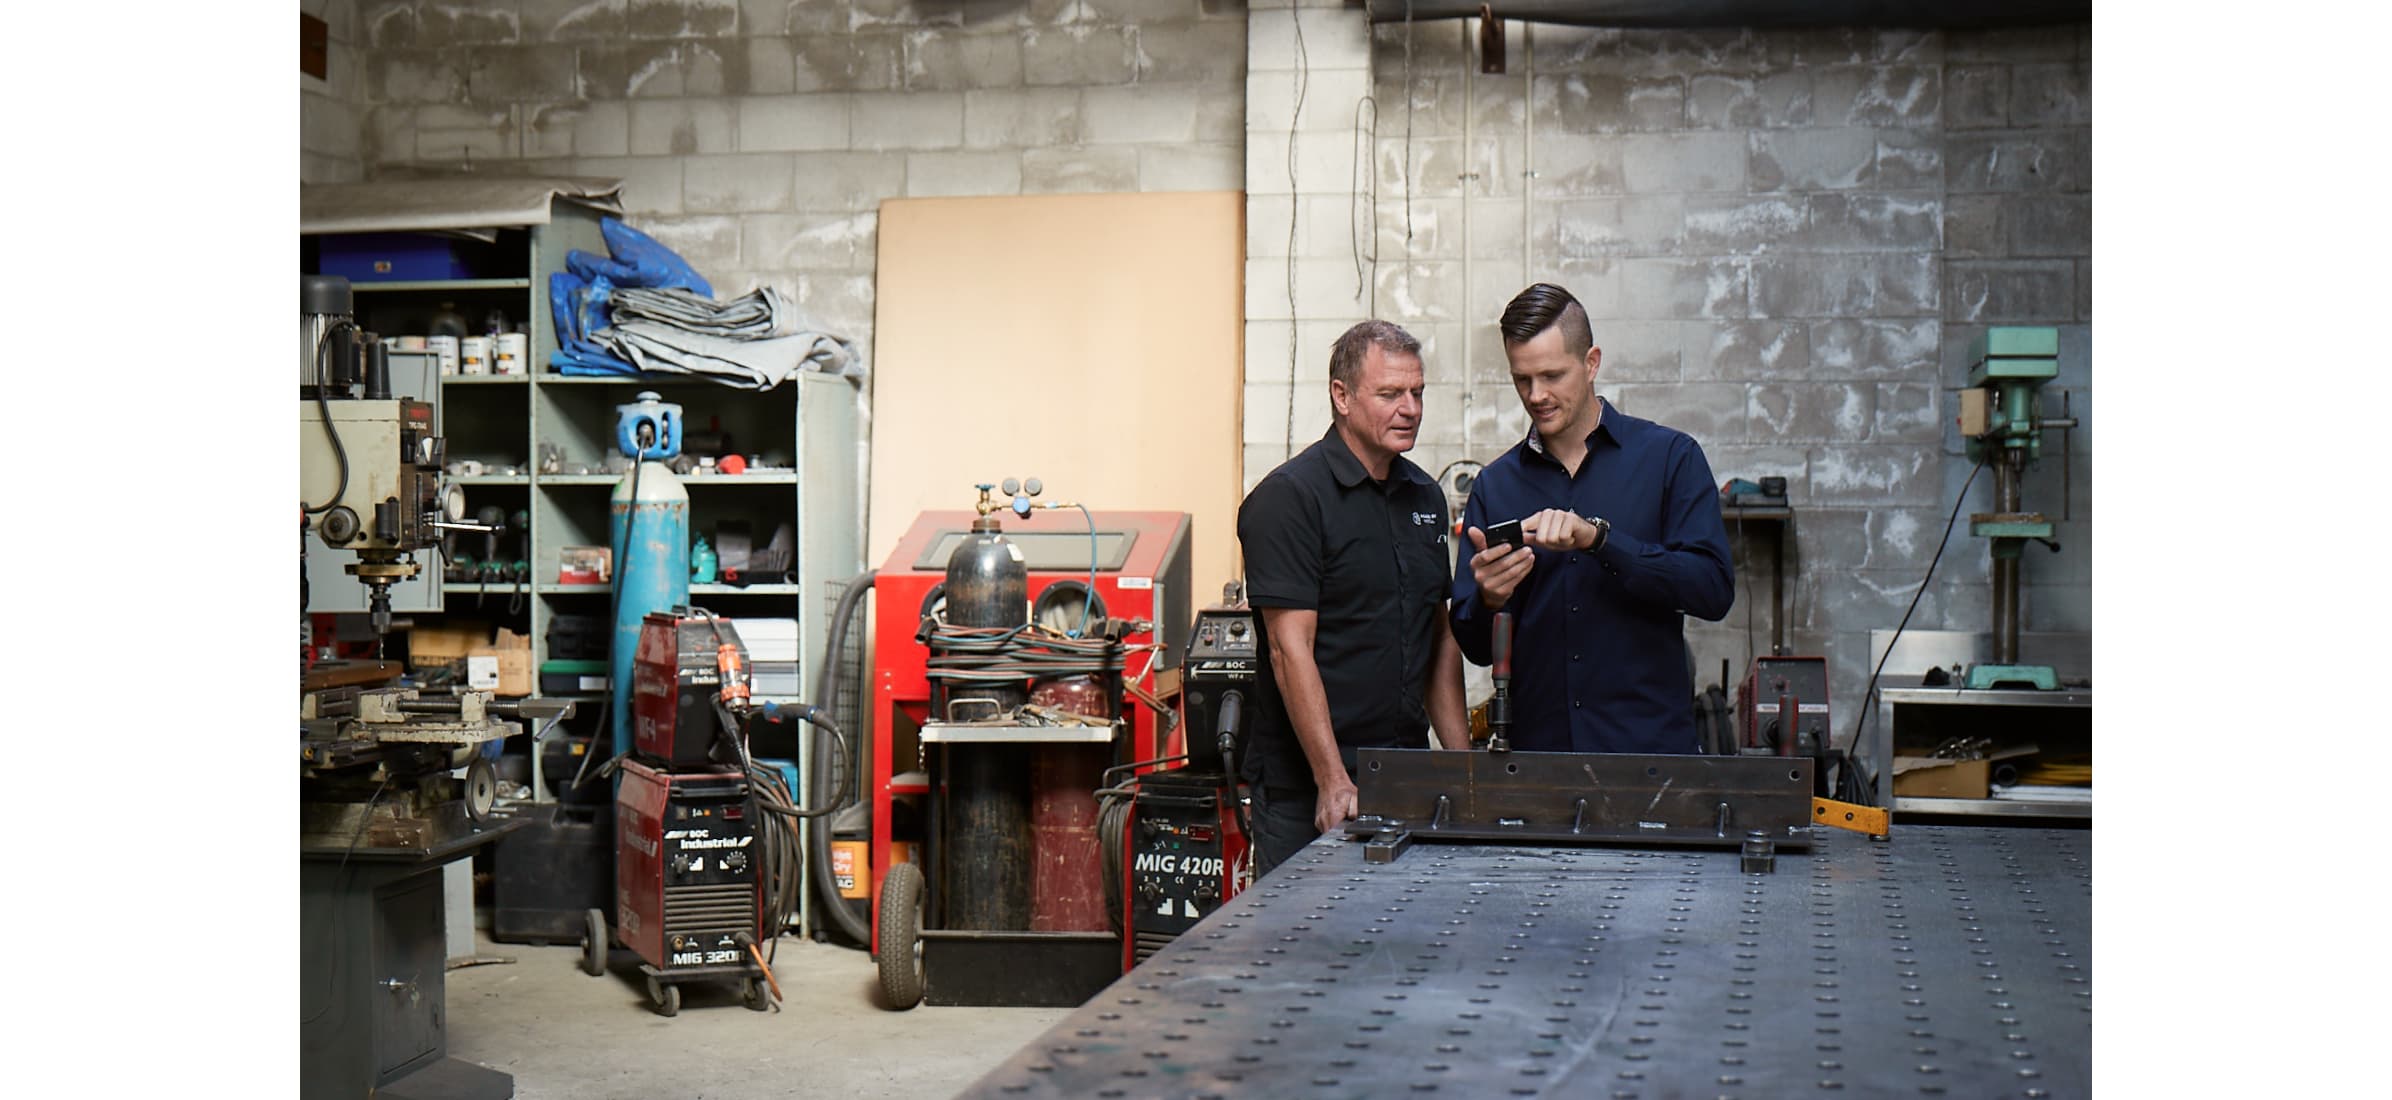 Ken from Made In Metal chats with Nathan from Maisey Harris & Co in their workshop.